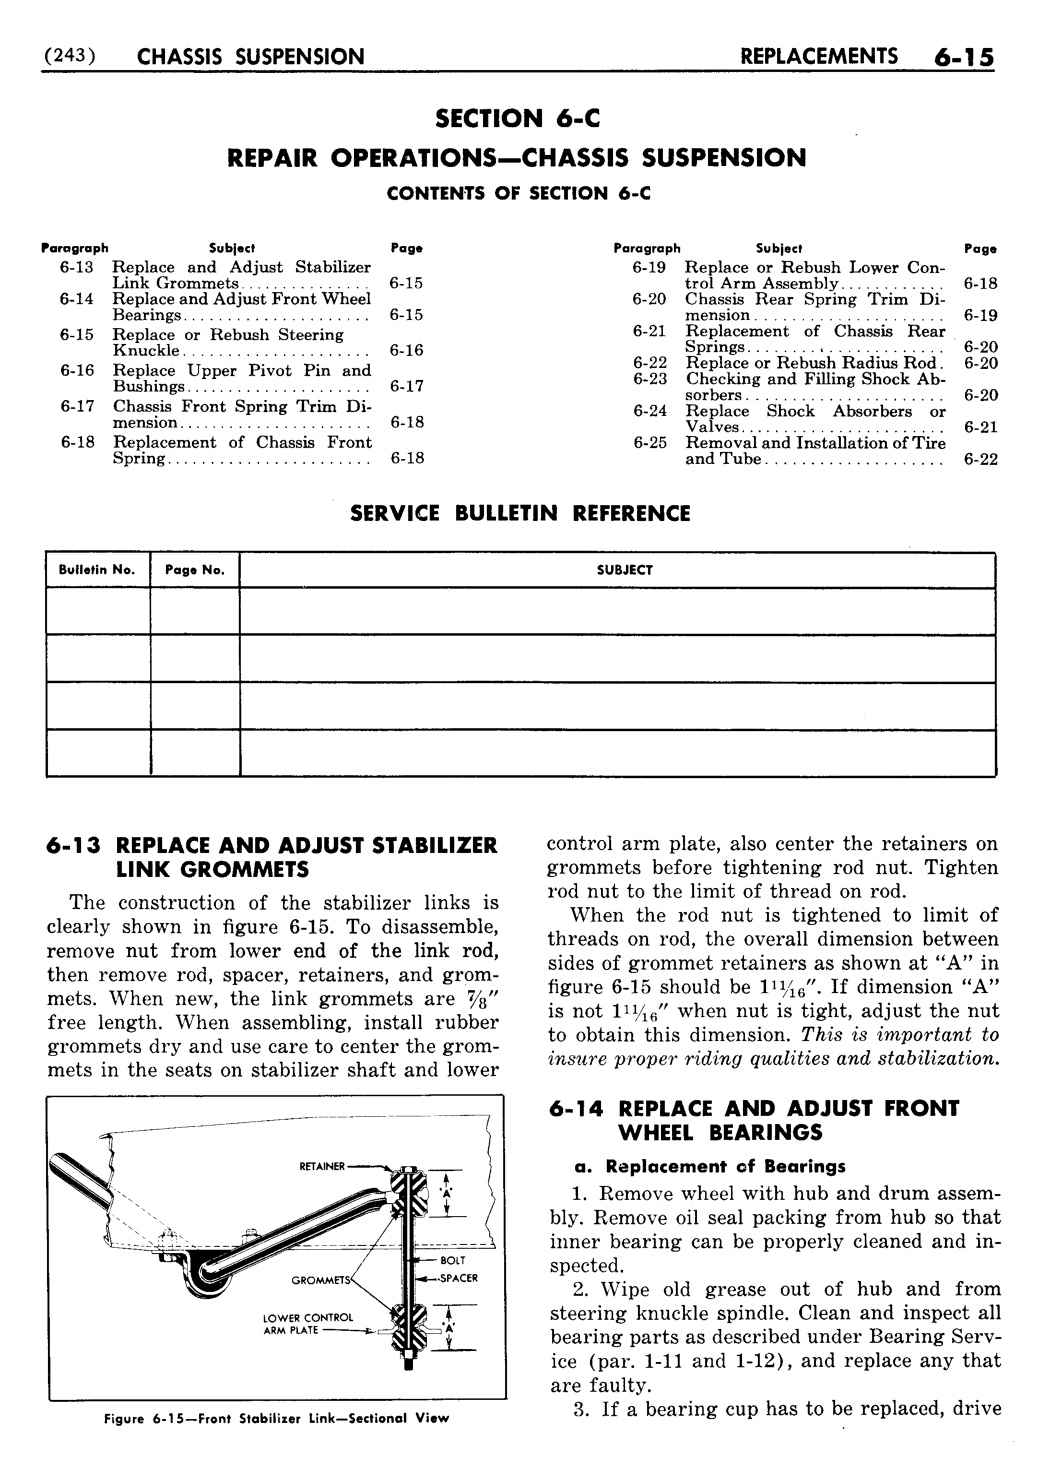 n_07 1951 Buick Shop Manual - Chassis Suspension-015-015.jpg